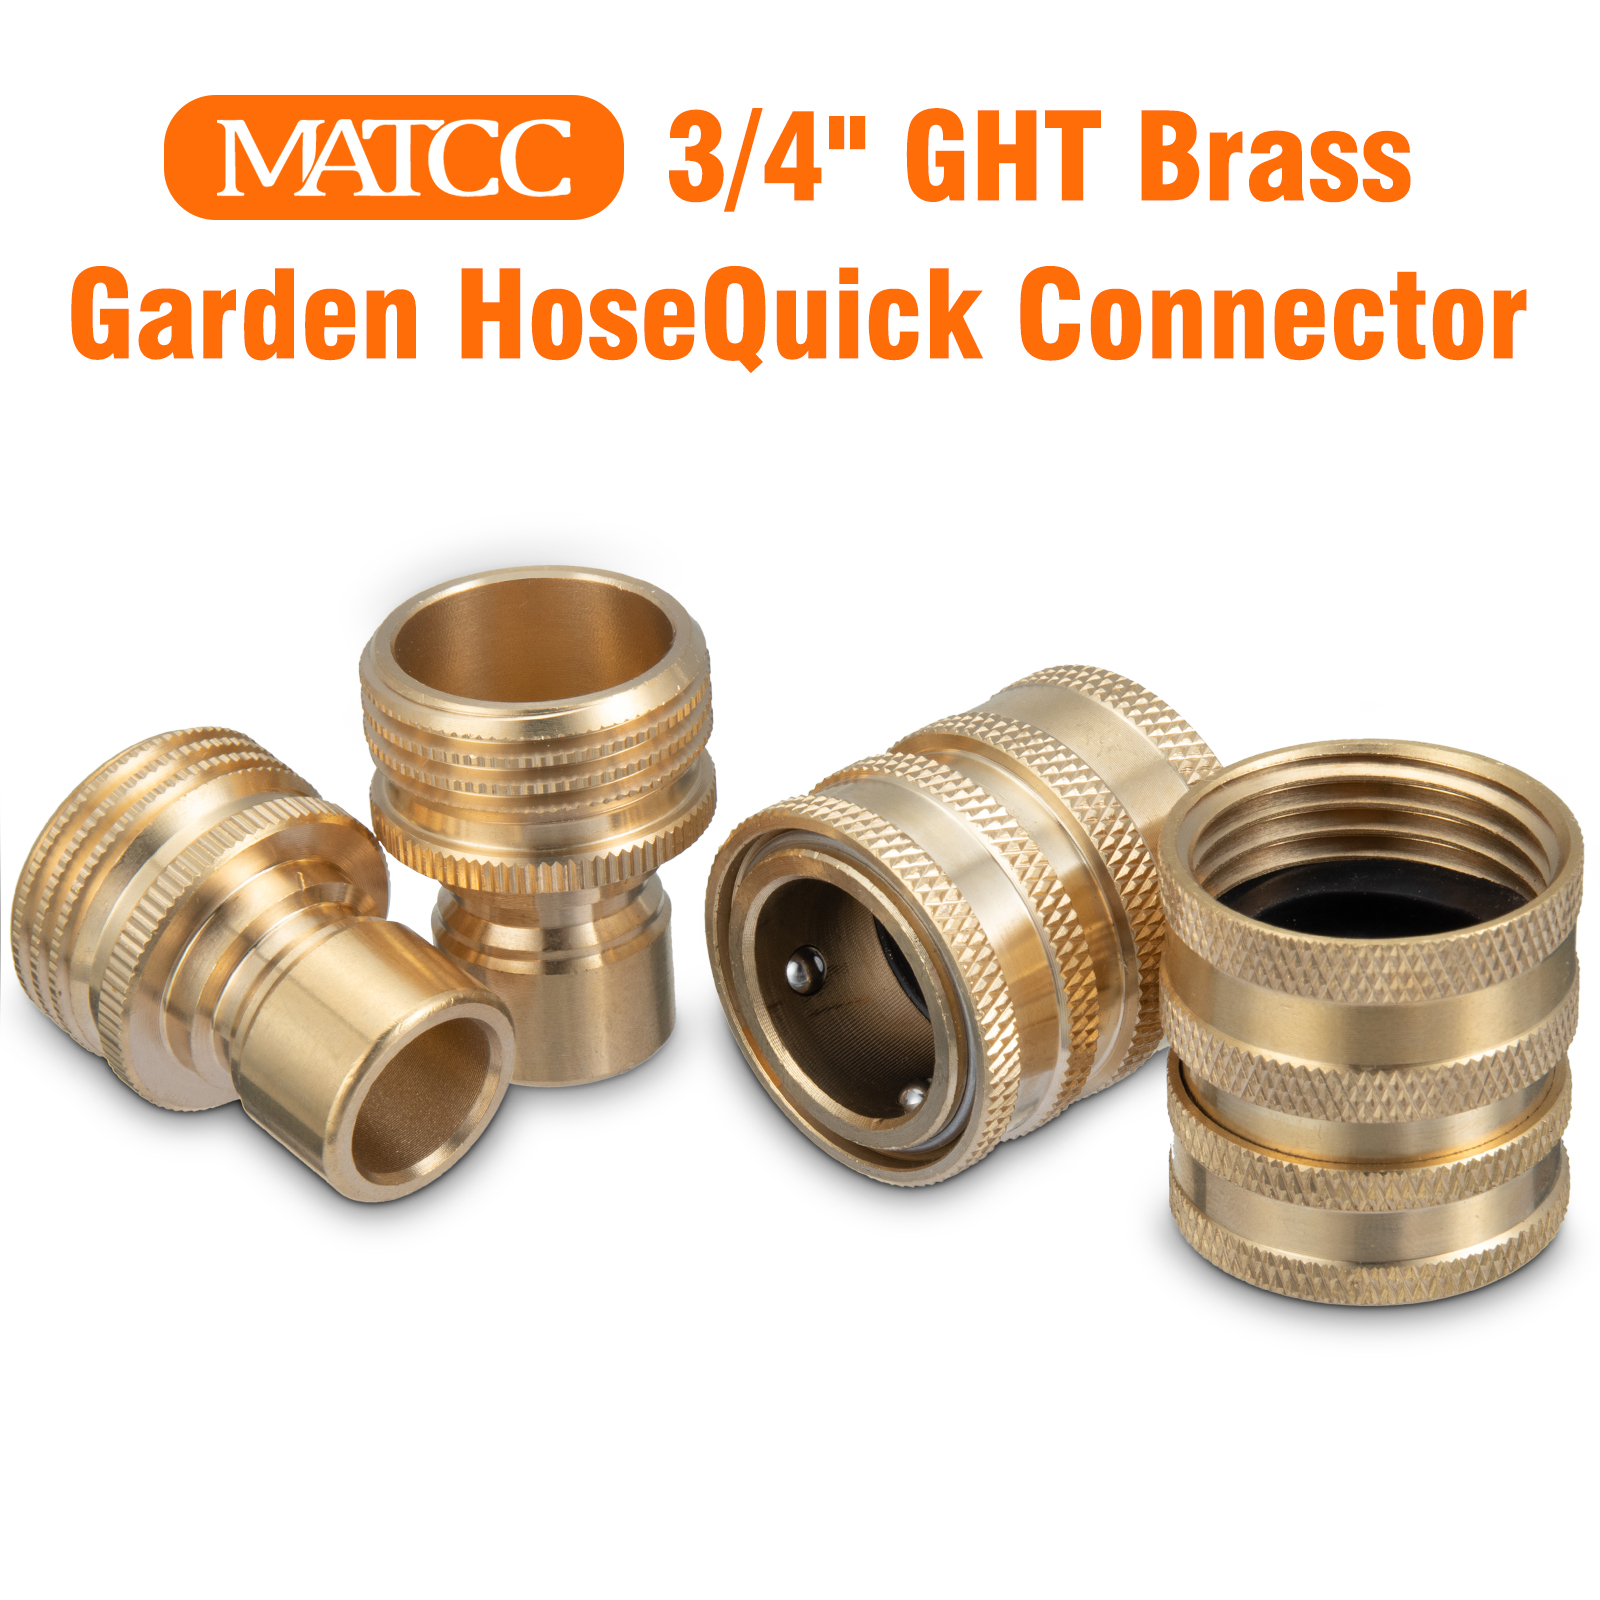 Garden-Hose-34in-GHT-Cokden-Solid-Brass-Quick-Connect-Kit-Watering-Outdoor-Home-1949837-4